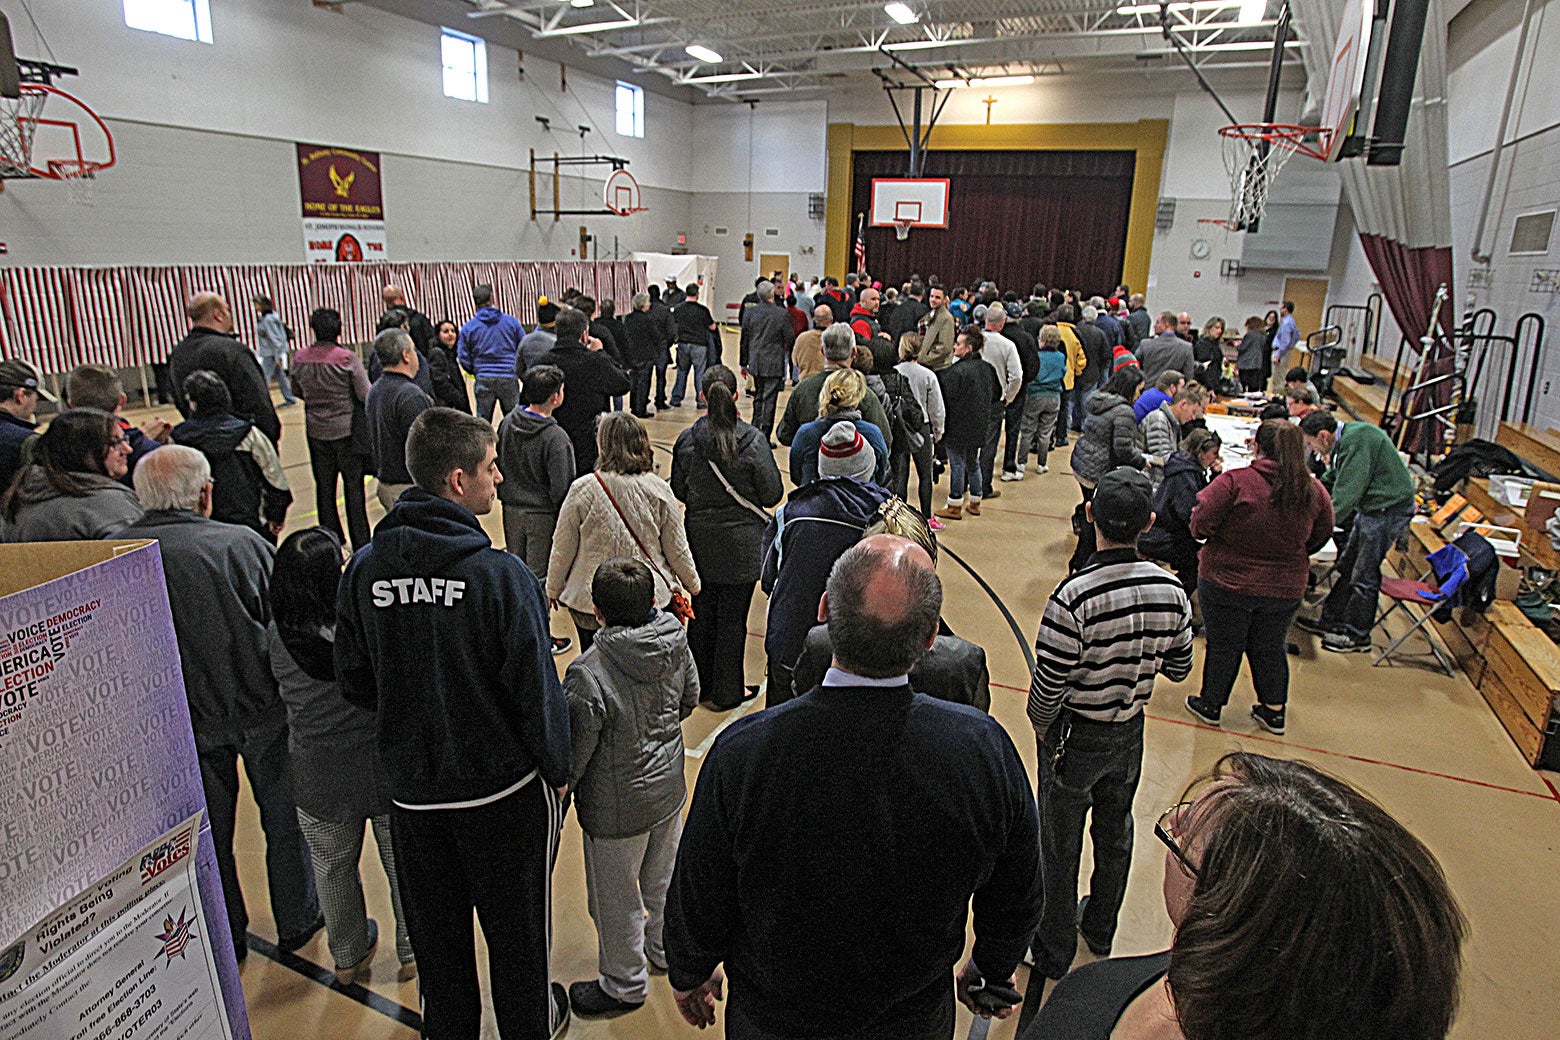 People wait in long lines to vote at Memorial High School in Manchester, New Hampshire, on Nov. 8, 2016.